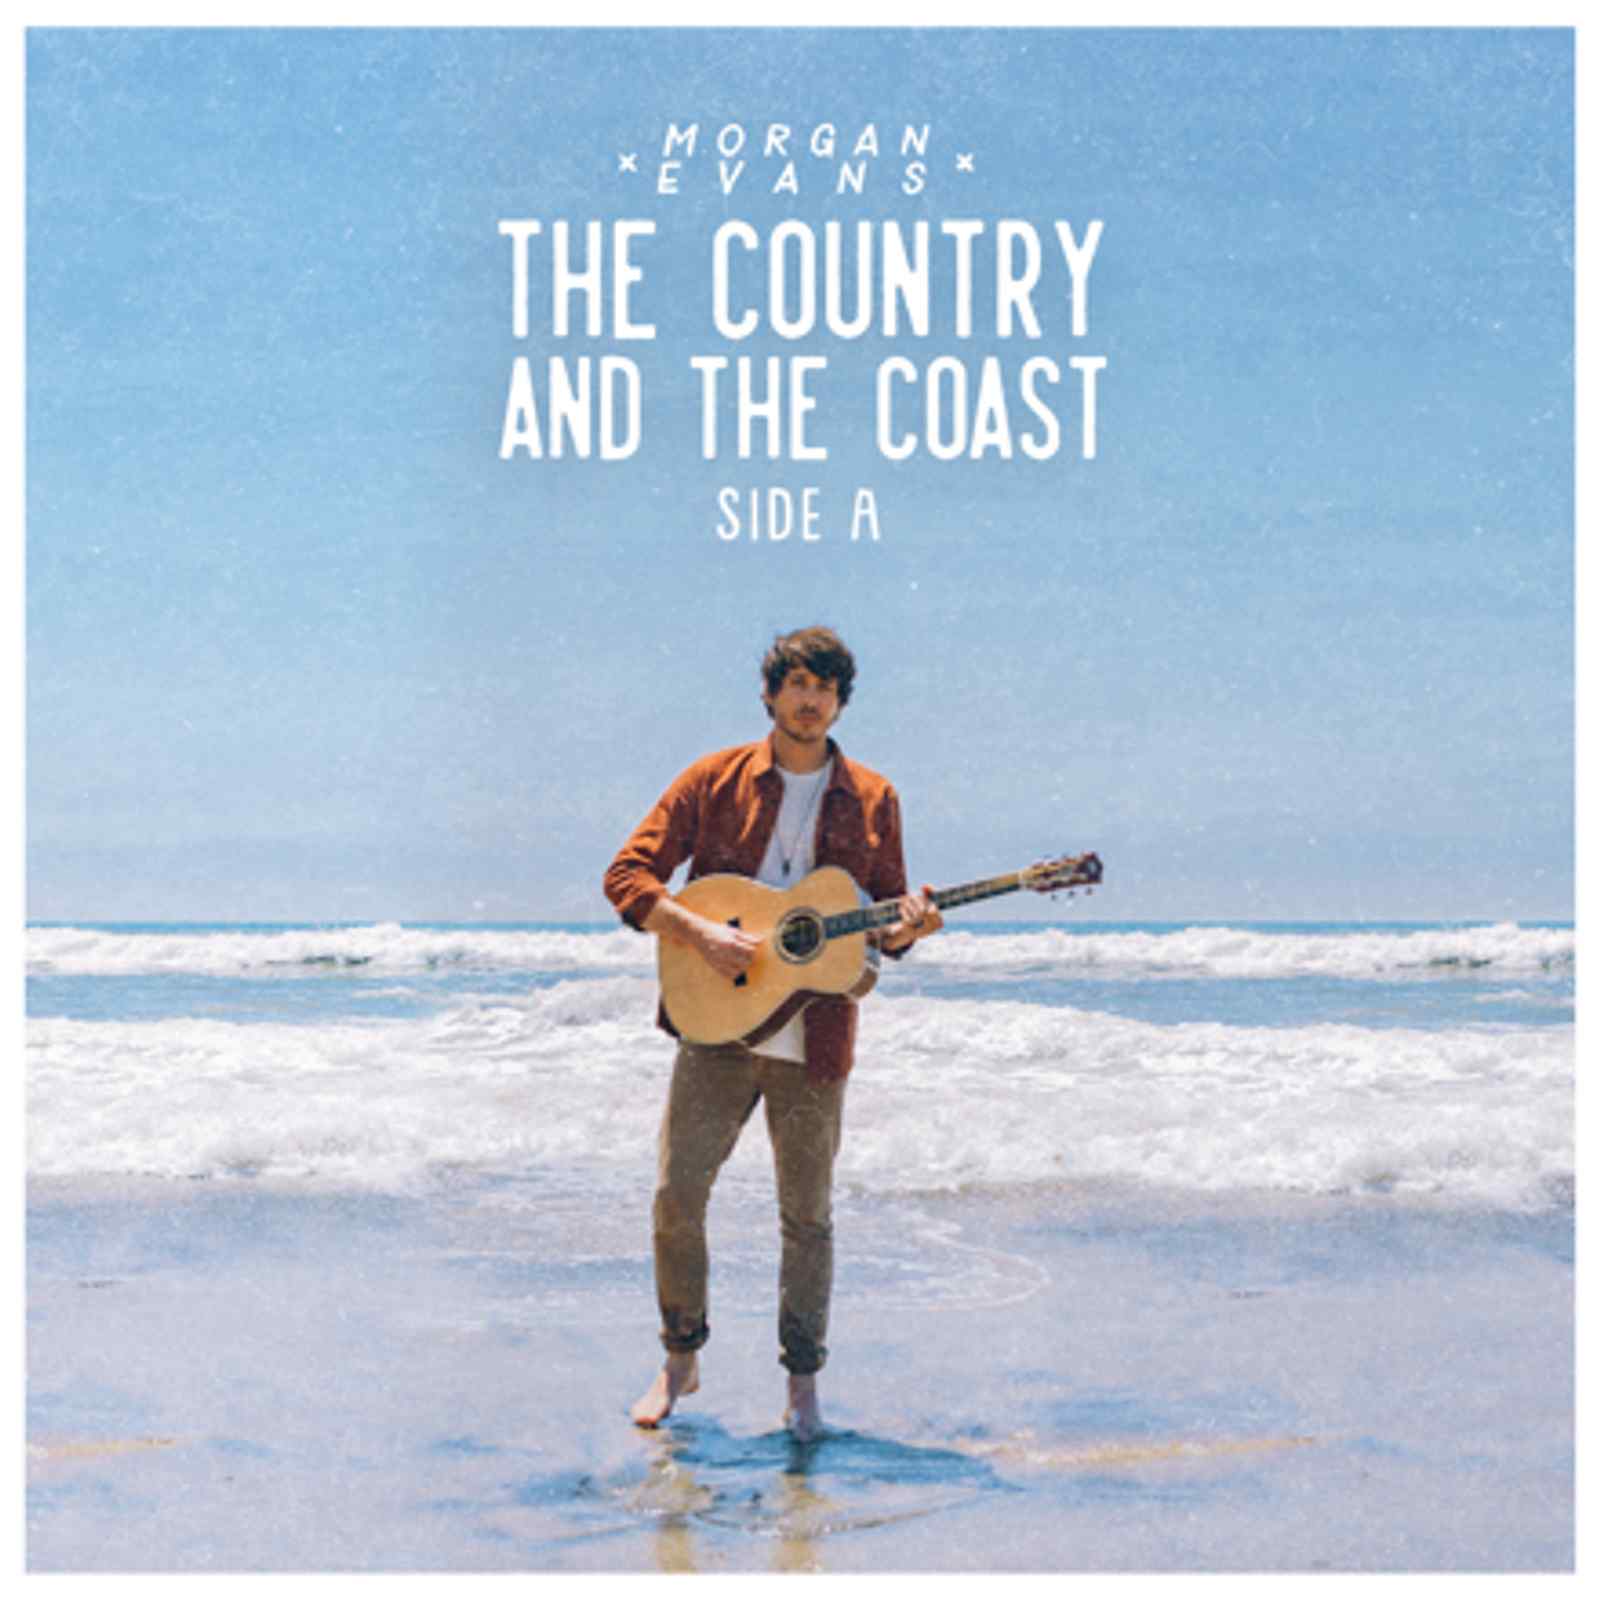 The Country and The Coast Side A by Morgan Evans